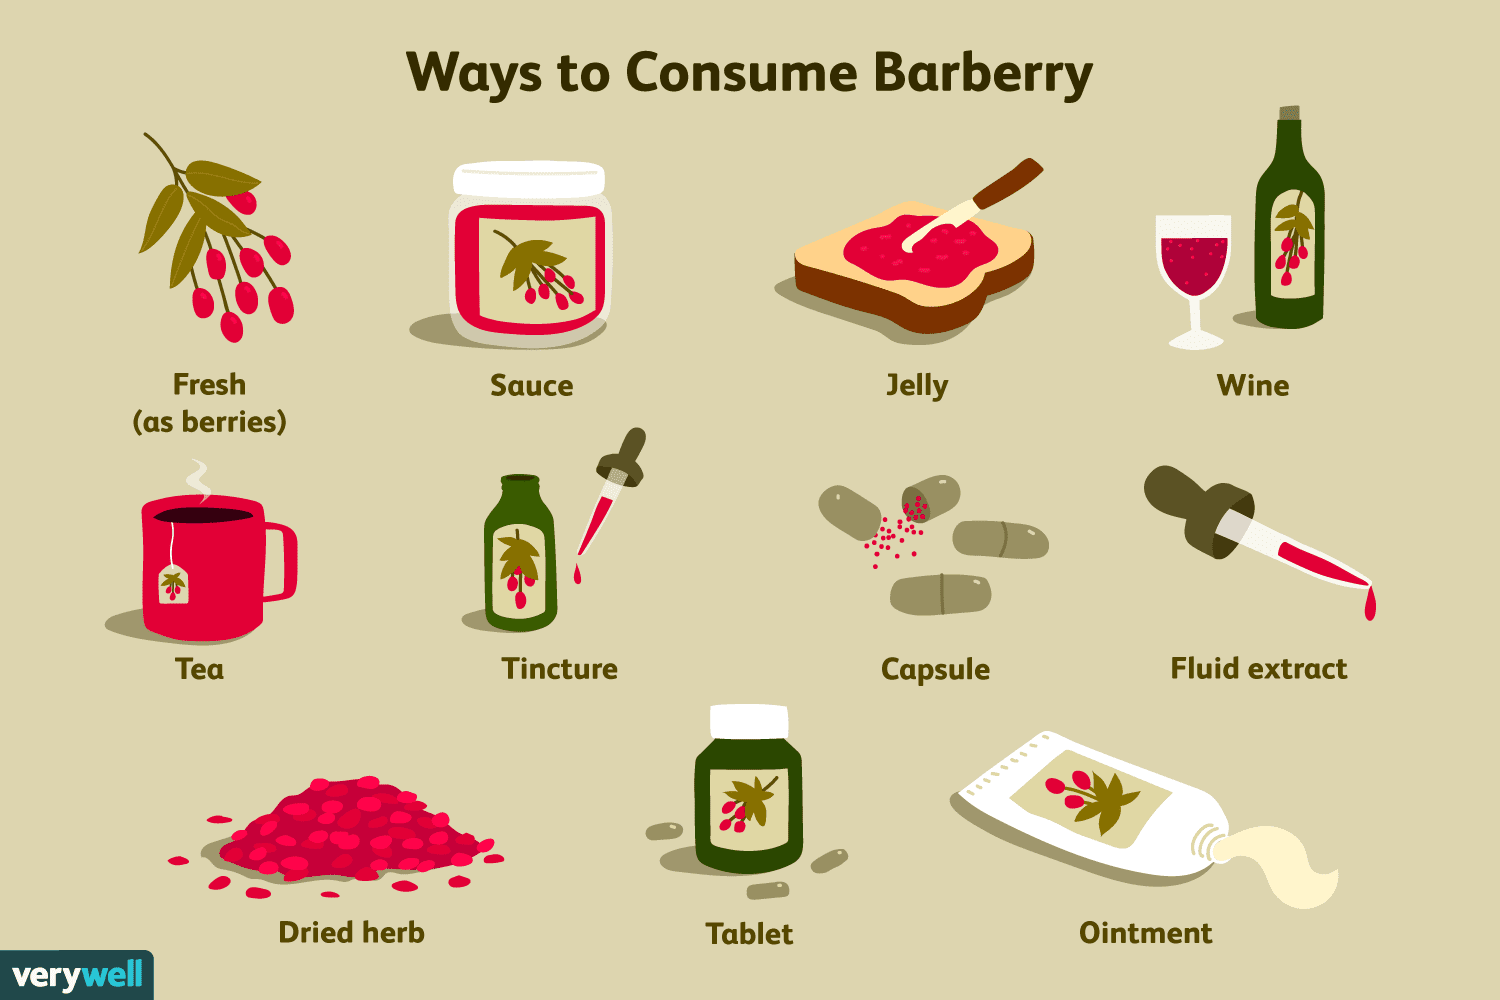 Consume Barberry